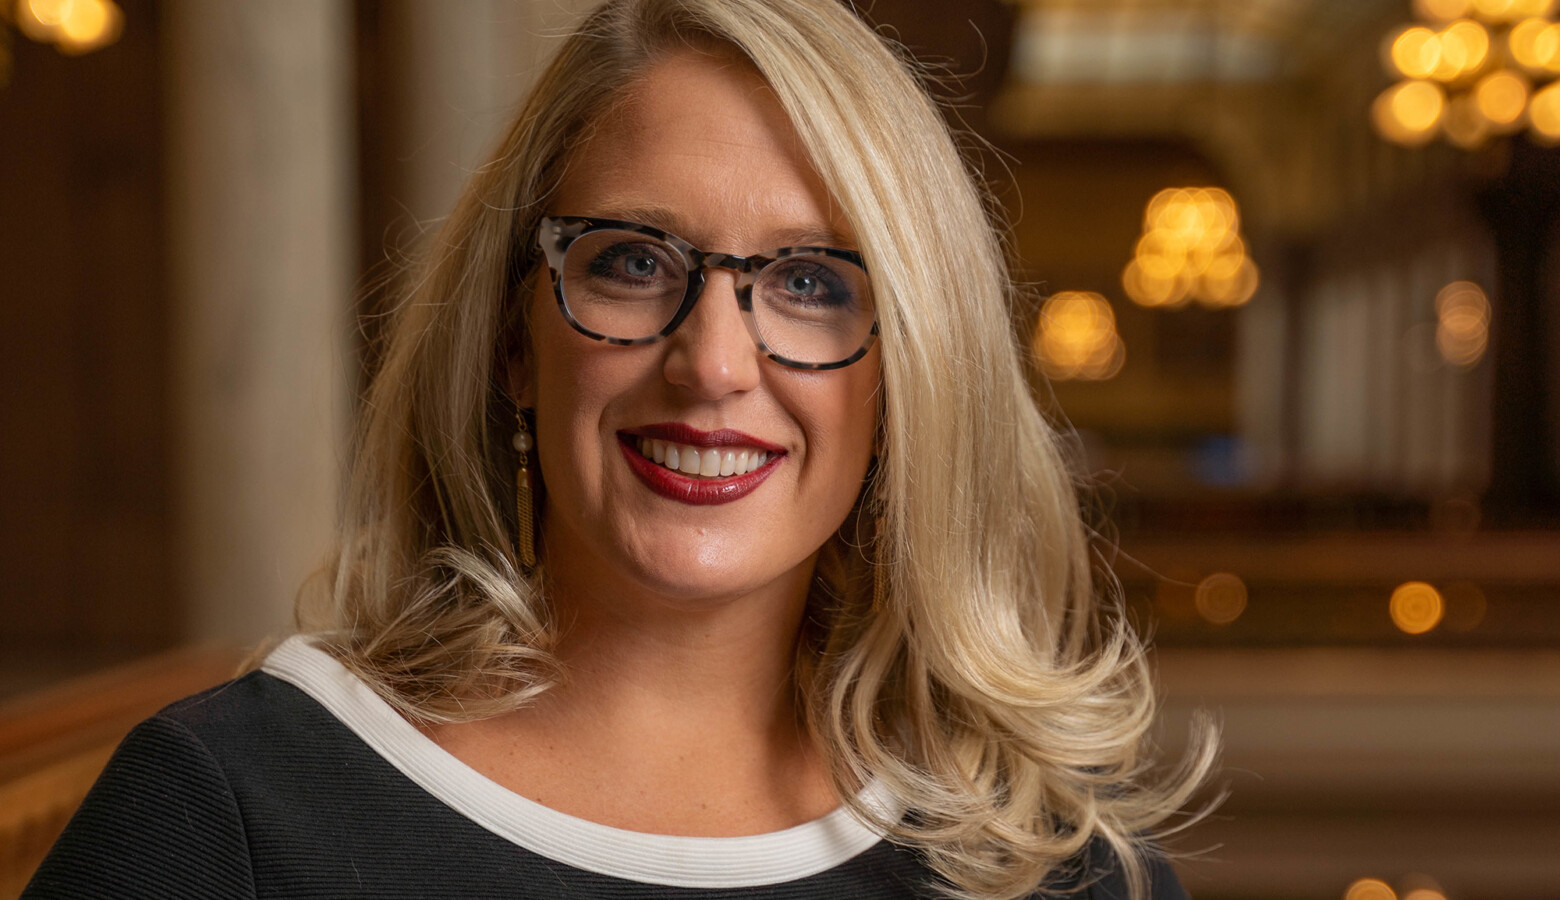 Gov. Eric Holcomb will appoint Katie Jenner as Indiana's first-ever appointed education secretary. (Courtesy of Governor Holcomb's office)